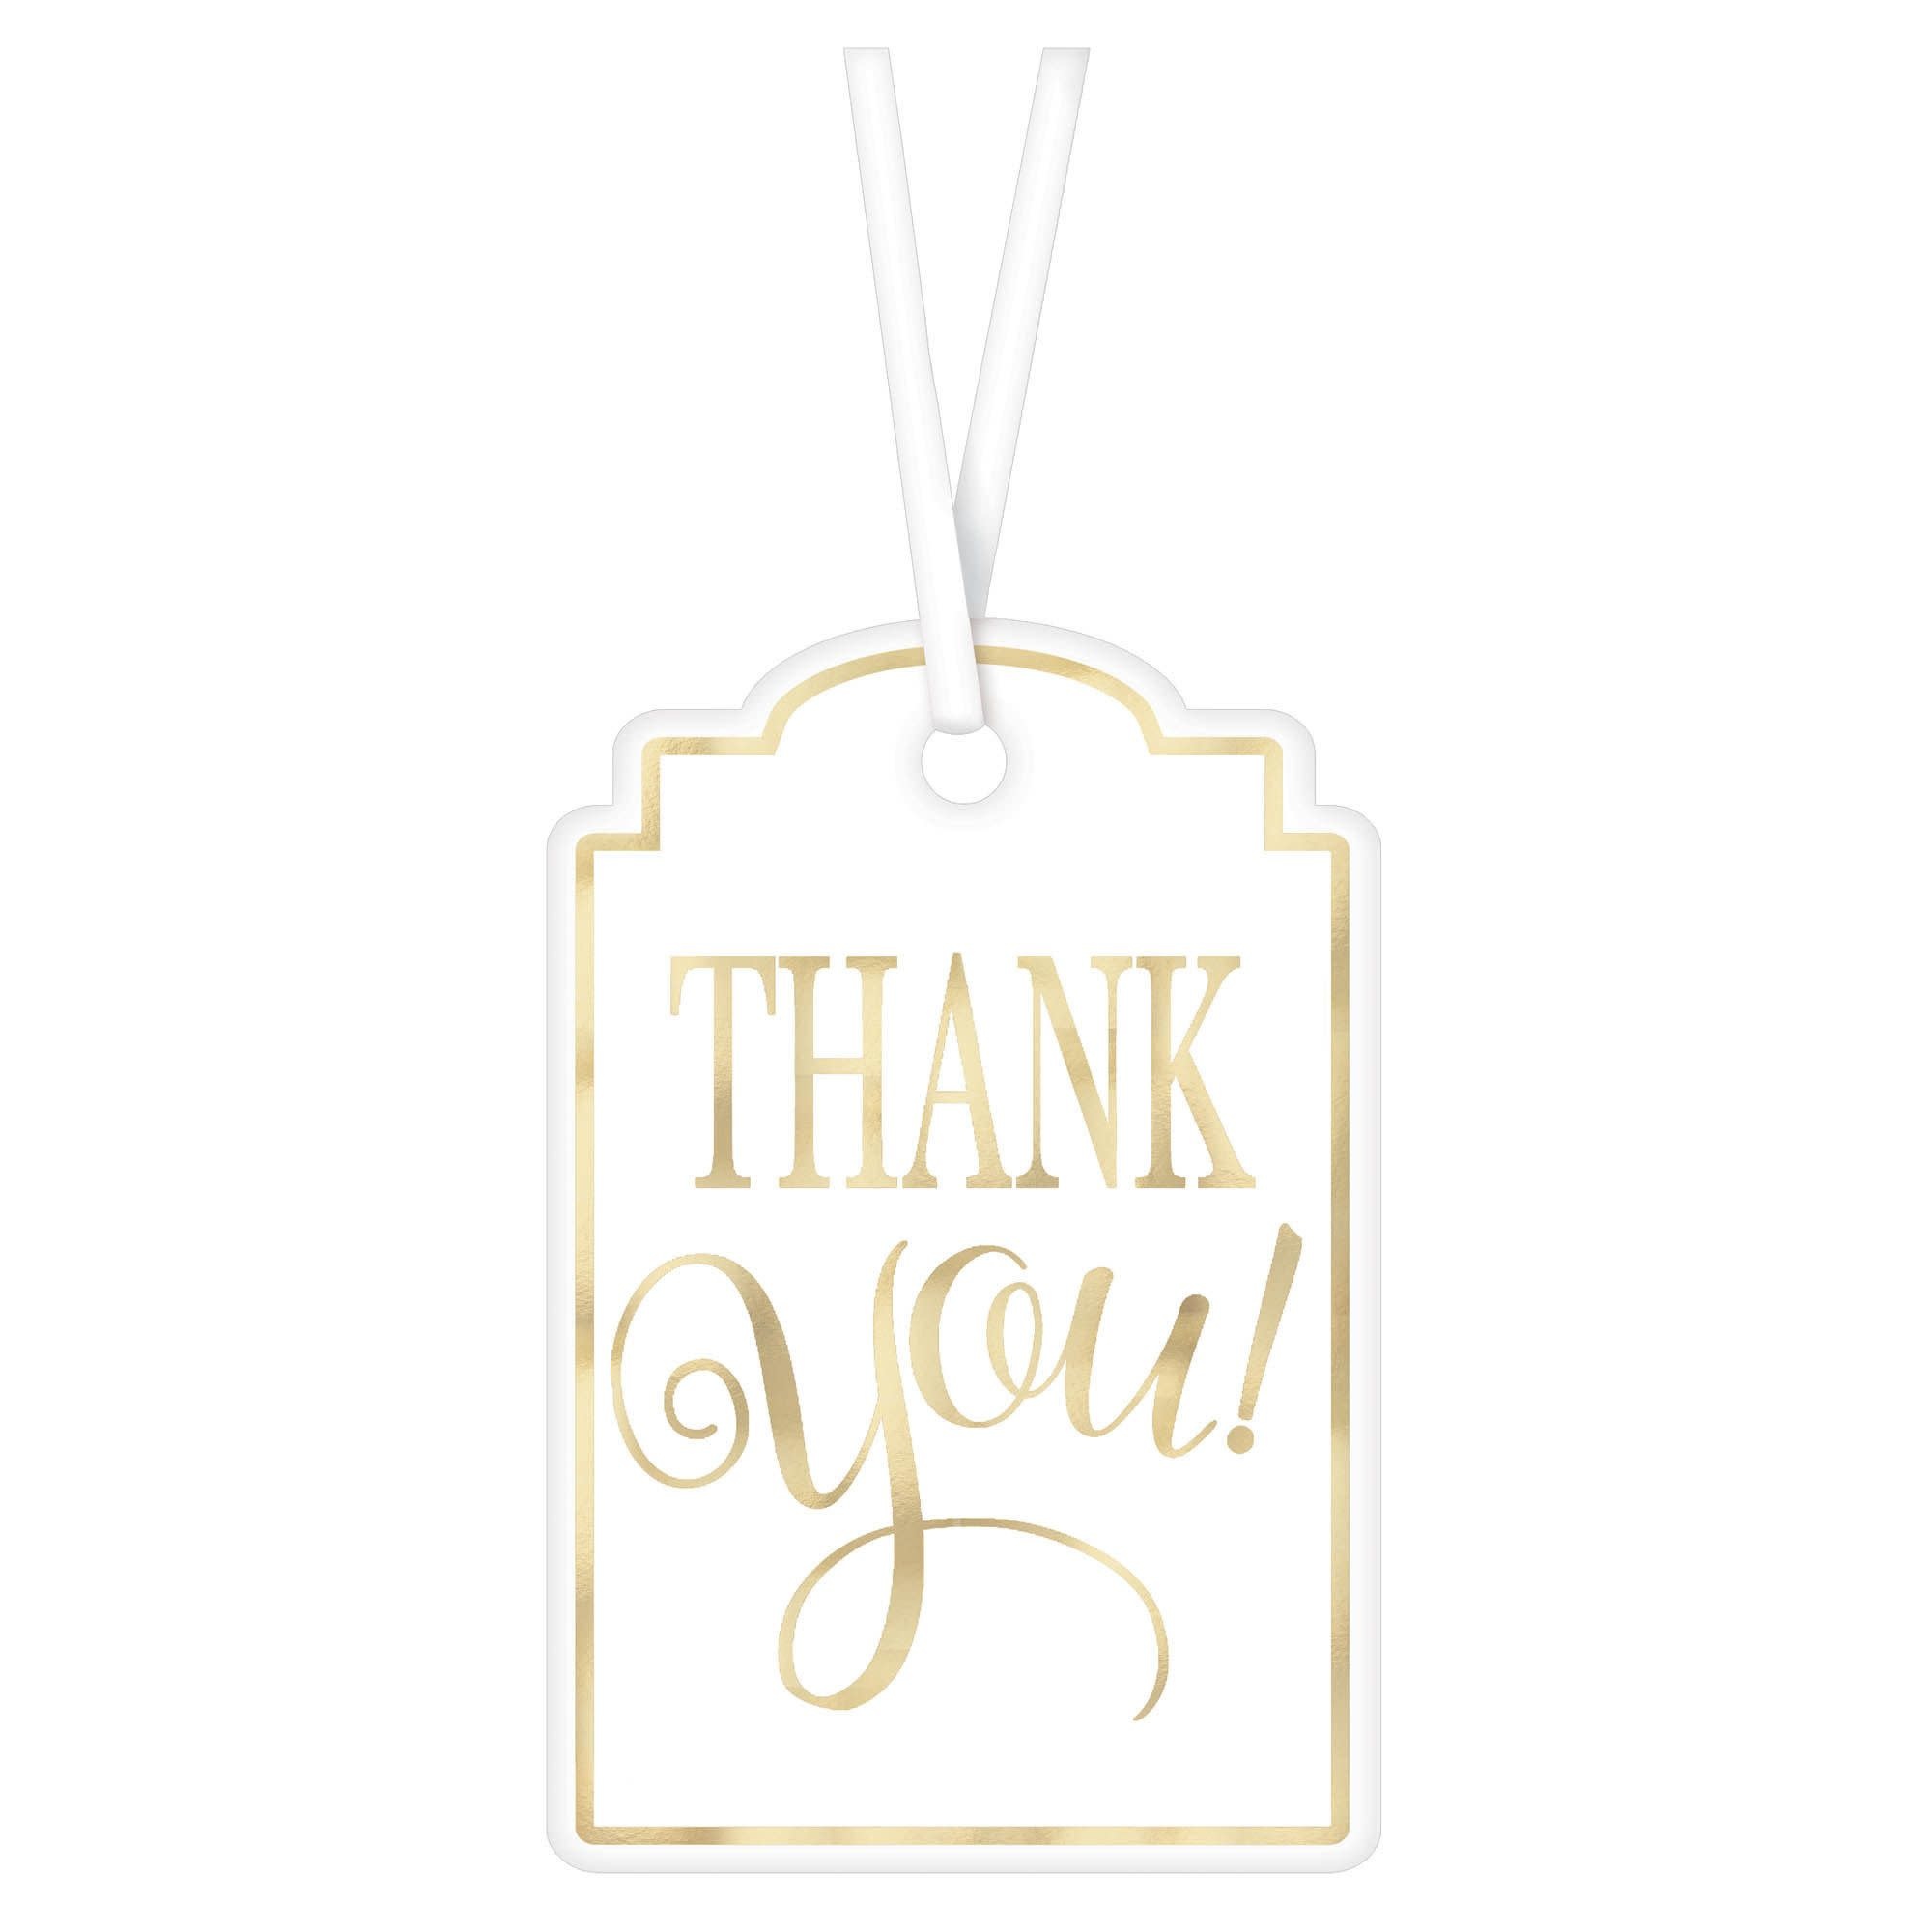 "Thank You" Printed Tags - 25 Count